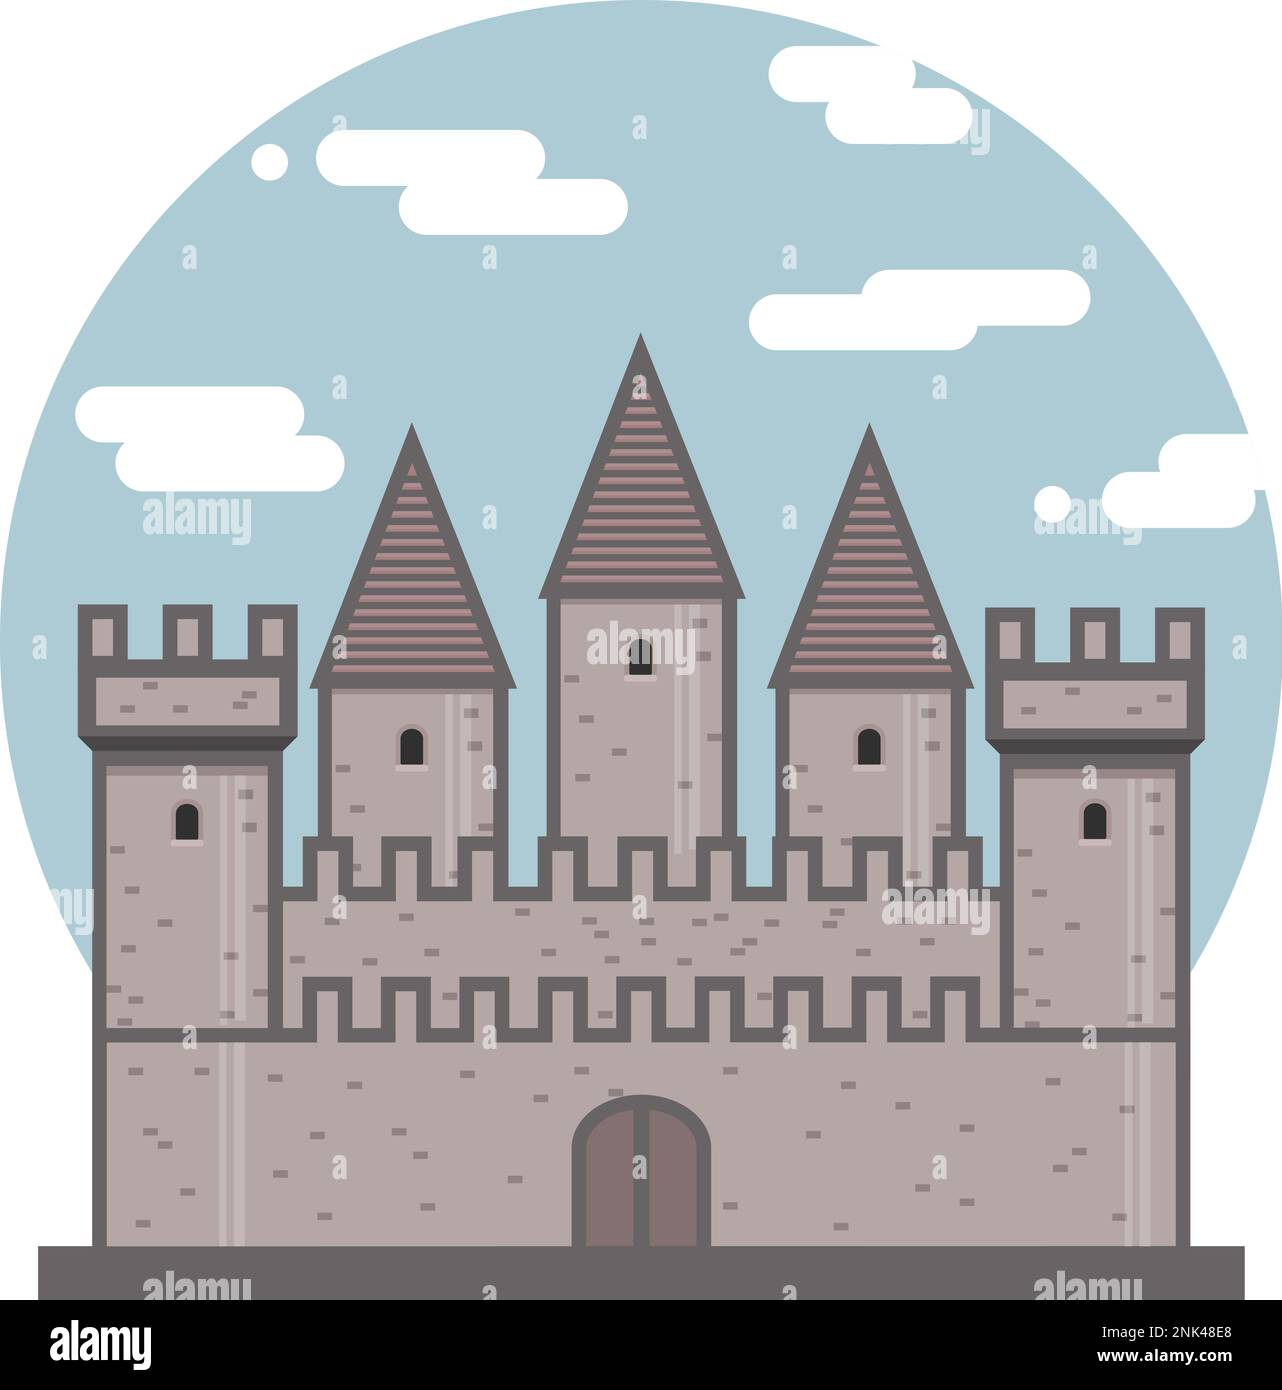 Medieval ancient castle flat icon. Fortress on sky circle background. Medieval architecture. Vector illustration of knight castle with walls and tower Stock Vector